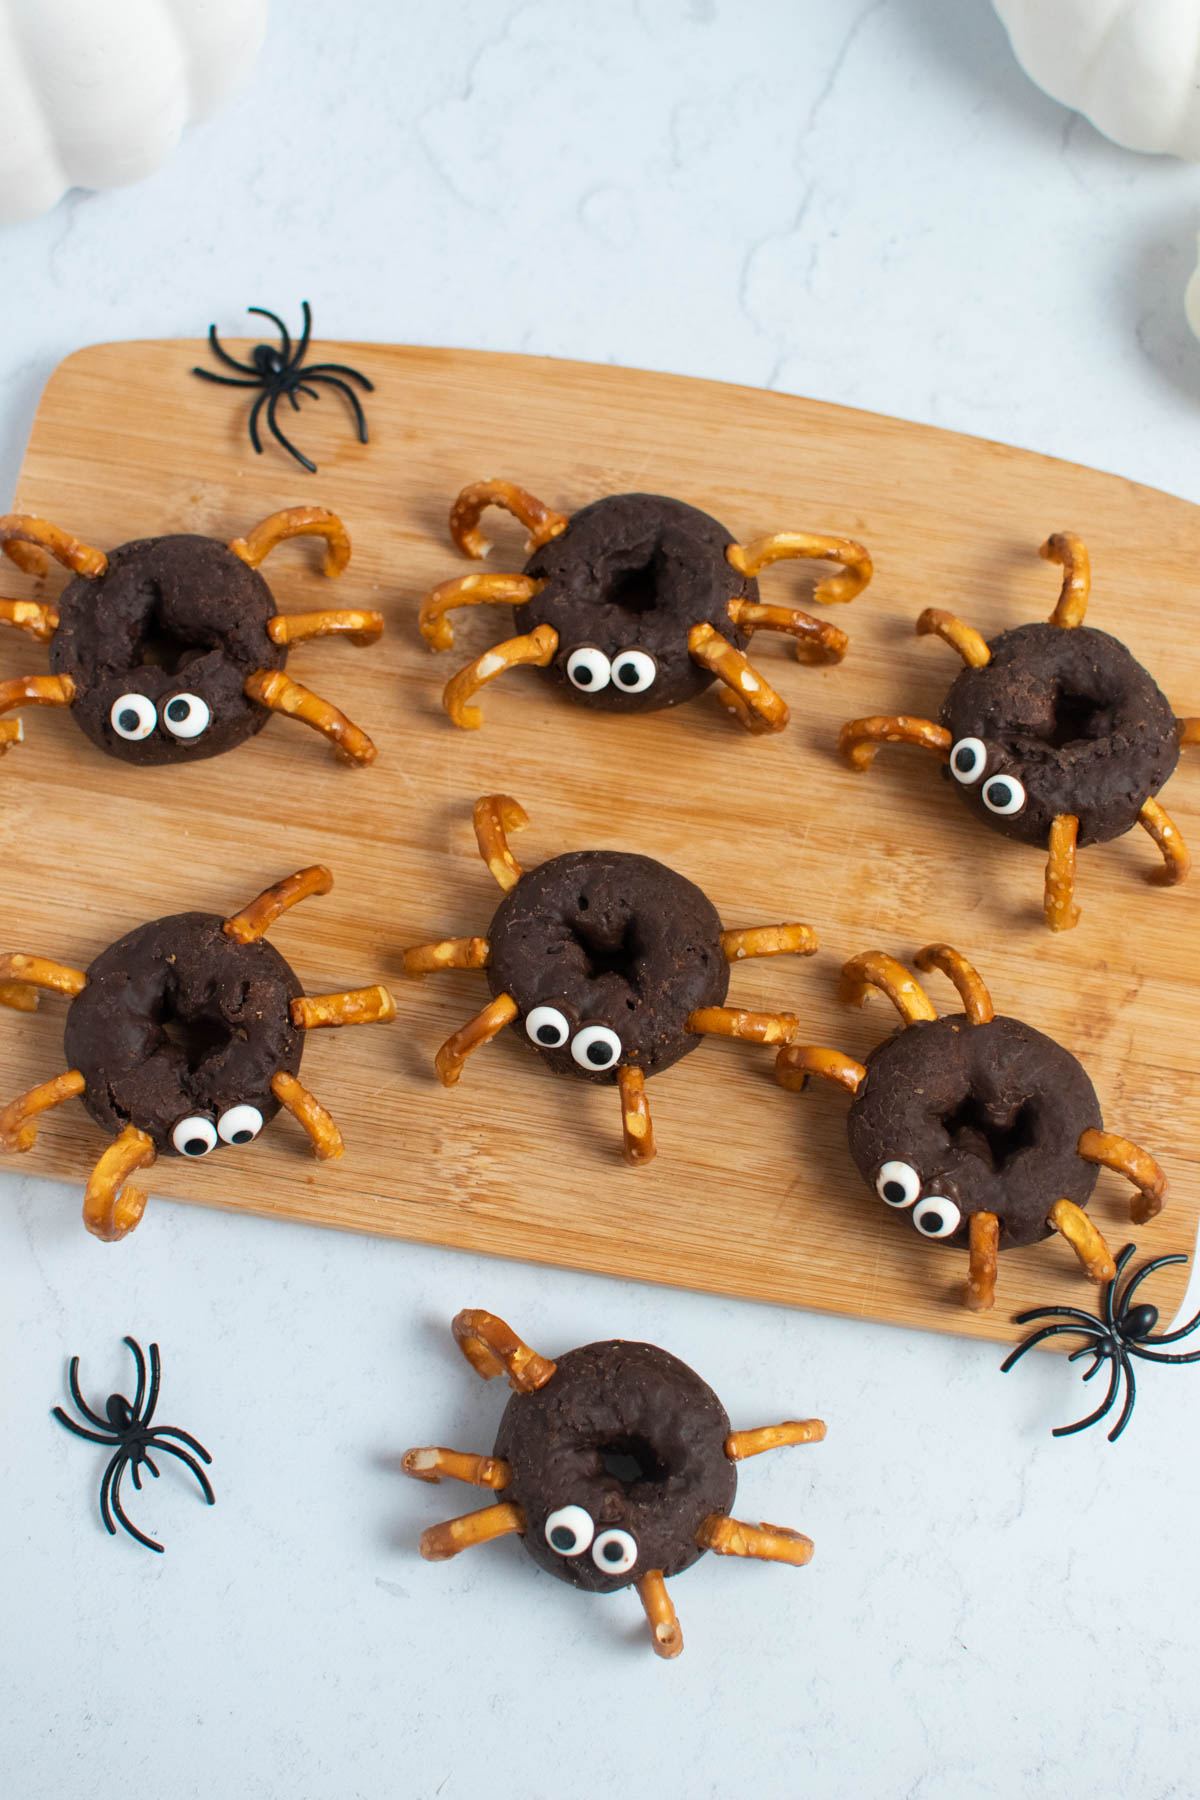 Seven donut spiders on wood cutting board surrounded by plastic spiders.